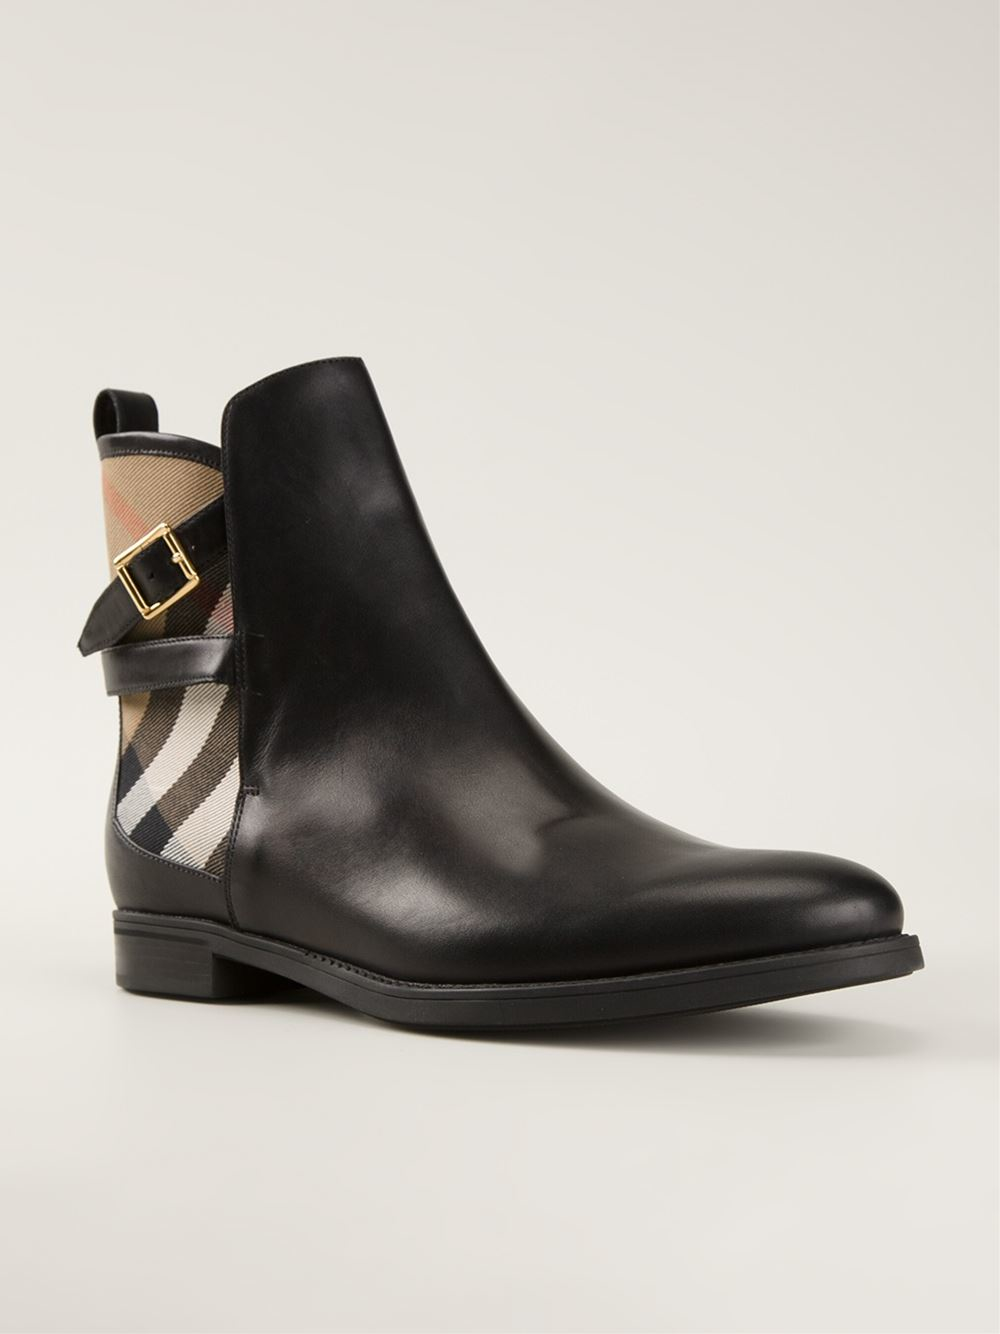 Burberry Leather 'house' Check Ankle Boots in Black | Lyst